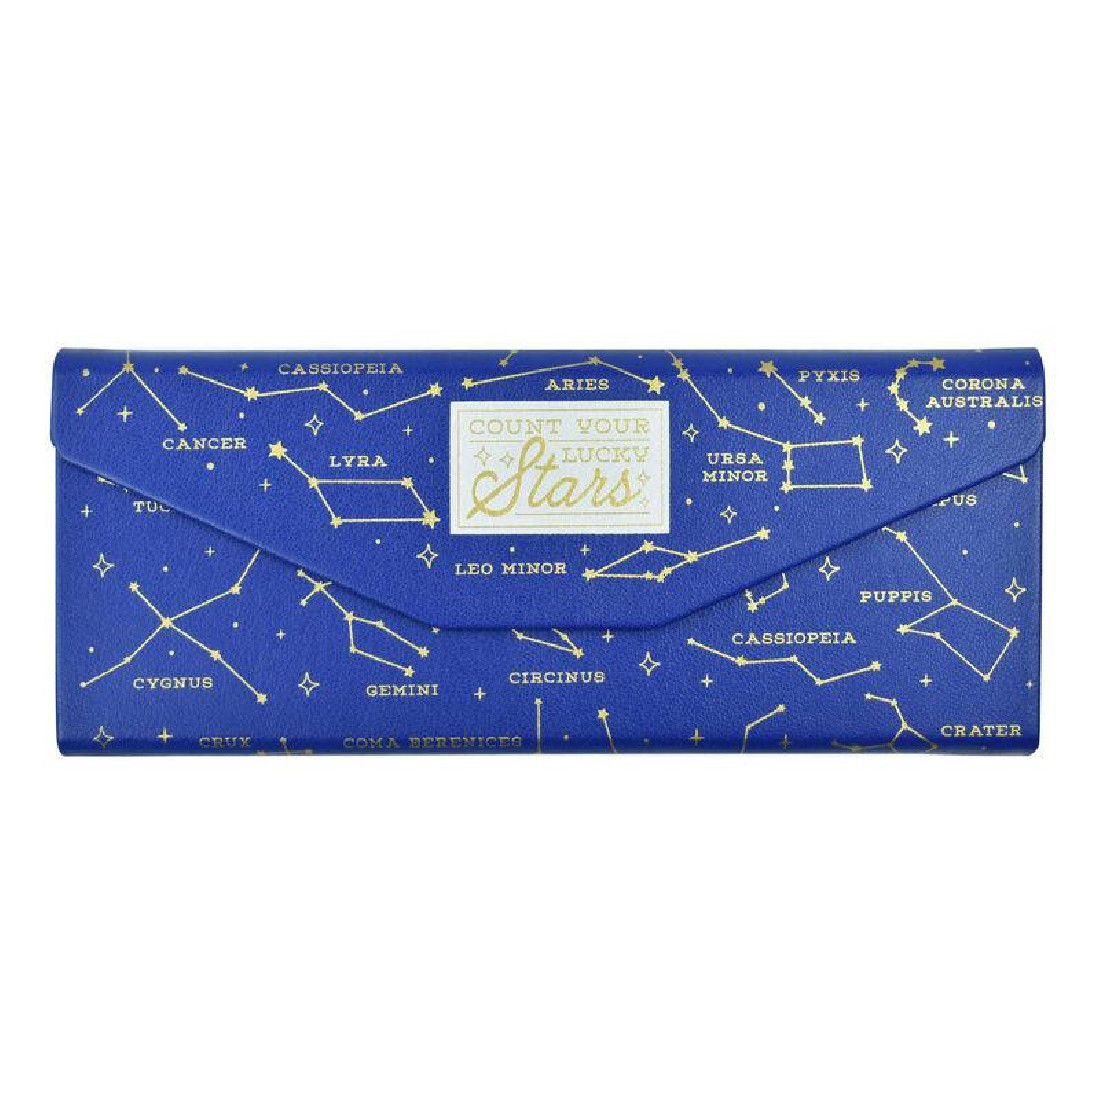 FOLDABLE GLASSES CASE  COUNT YOUR LUCKY STARS  LEGAMI